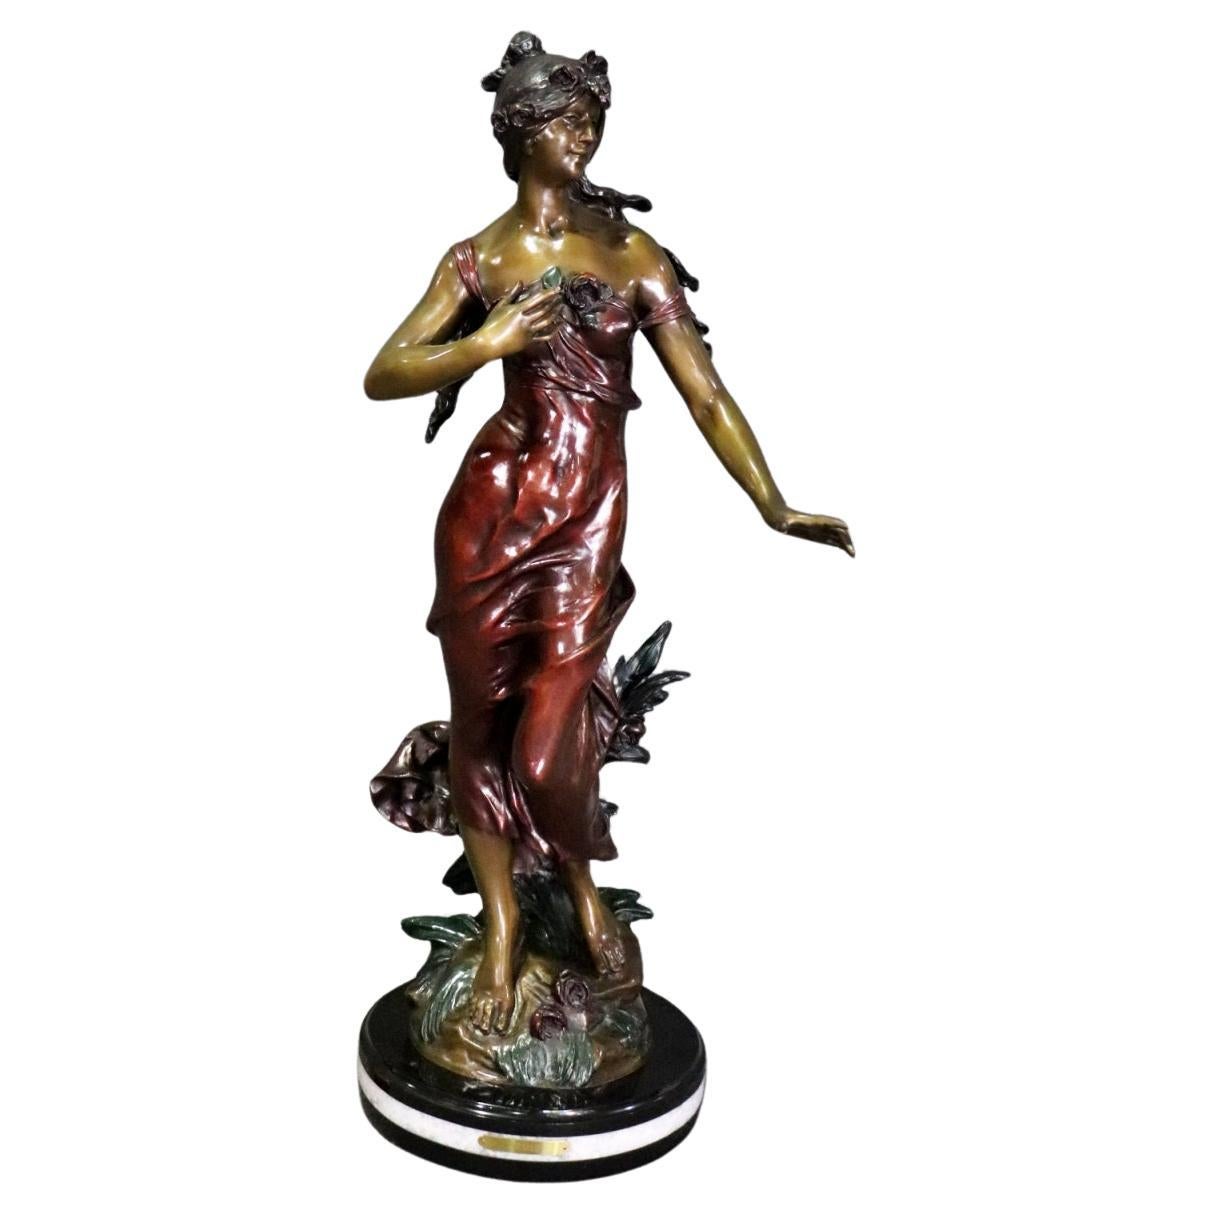 Signed Polychromed Bronze Sculpture of Woman in a Dress after Auguste Moreau